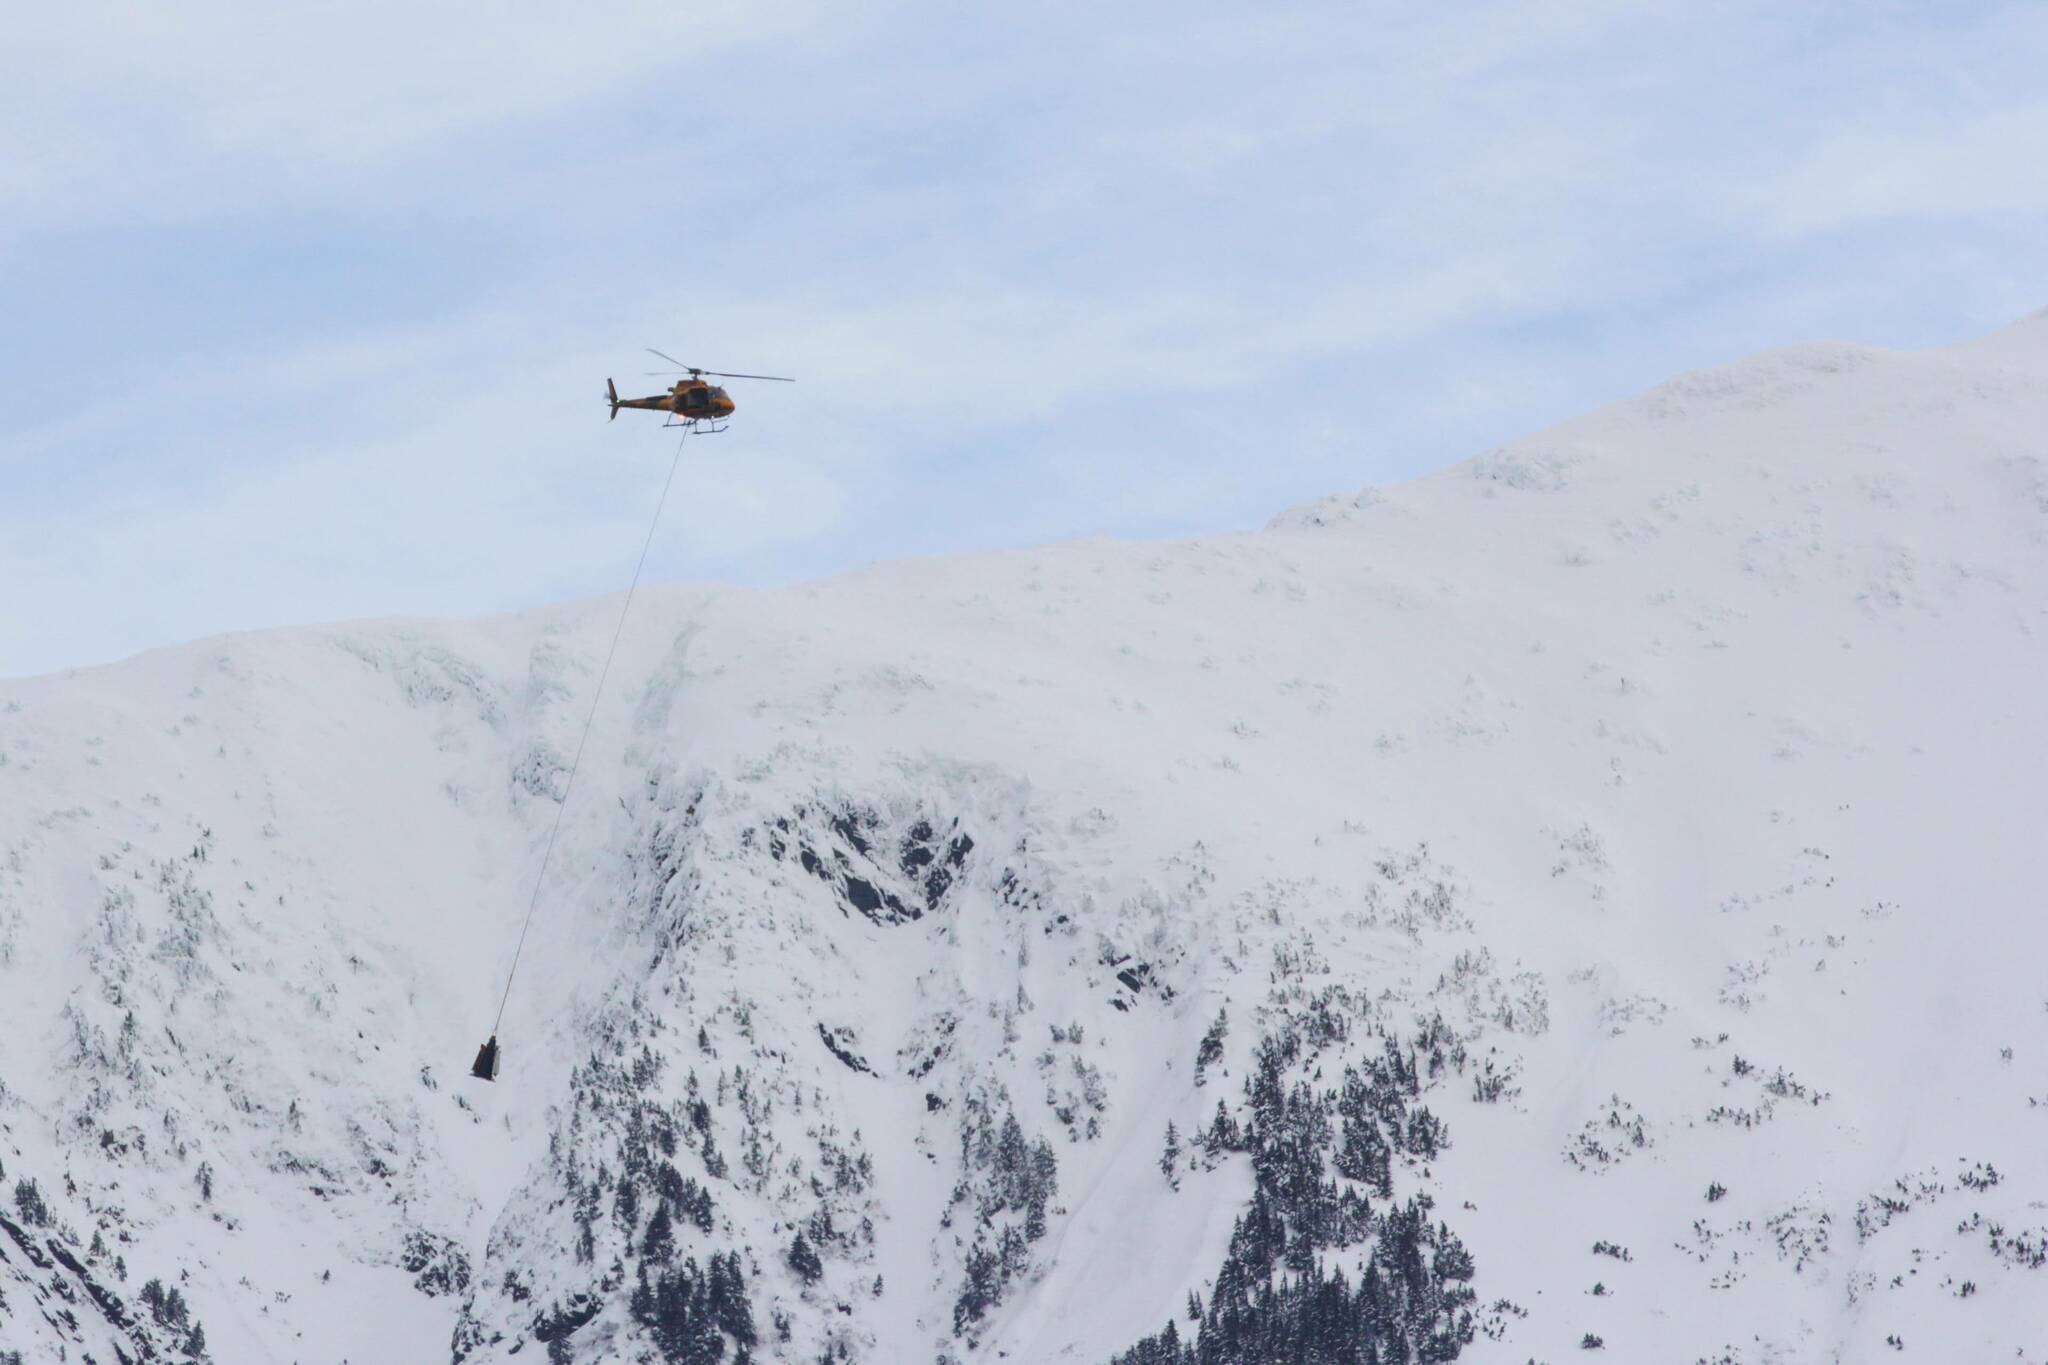 The Alaska Department of Transportation and Public Facilities, contracting with Coastal Helicopters, works to reduce avalanche risk on Thane Road by setting off avalanches in a controlled fashion on Feb. 5, 2021. City officials are currently considering adopting new maps that designate additional avalanche and landslide areas downtown. (Michael S. Lockett / Juneau Empire File)